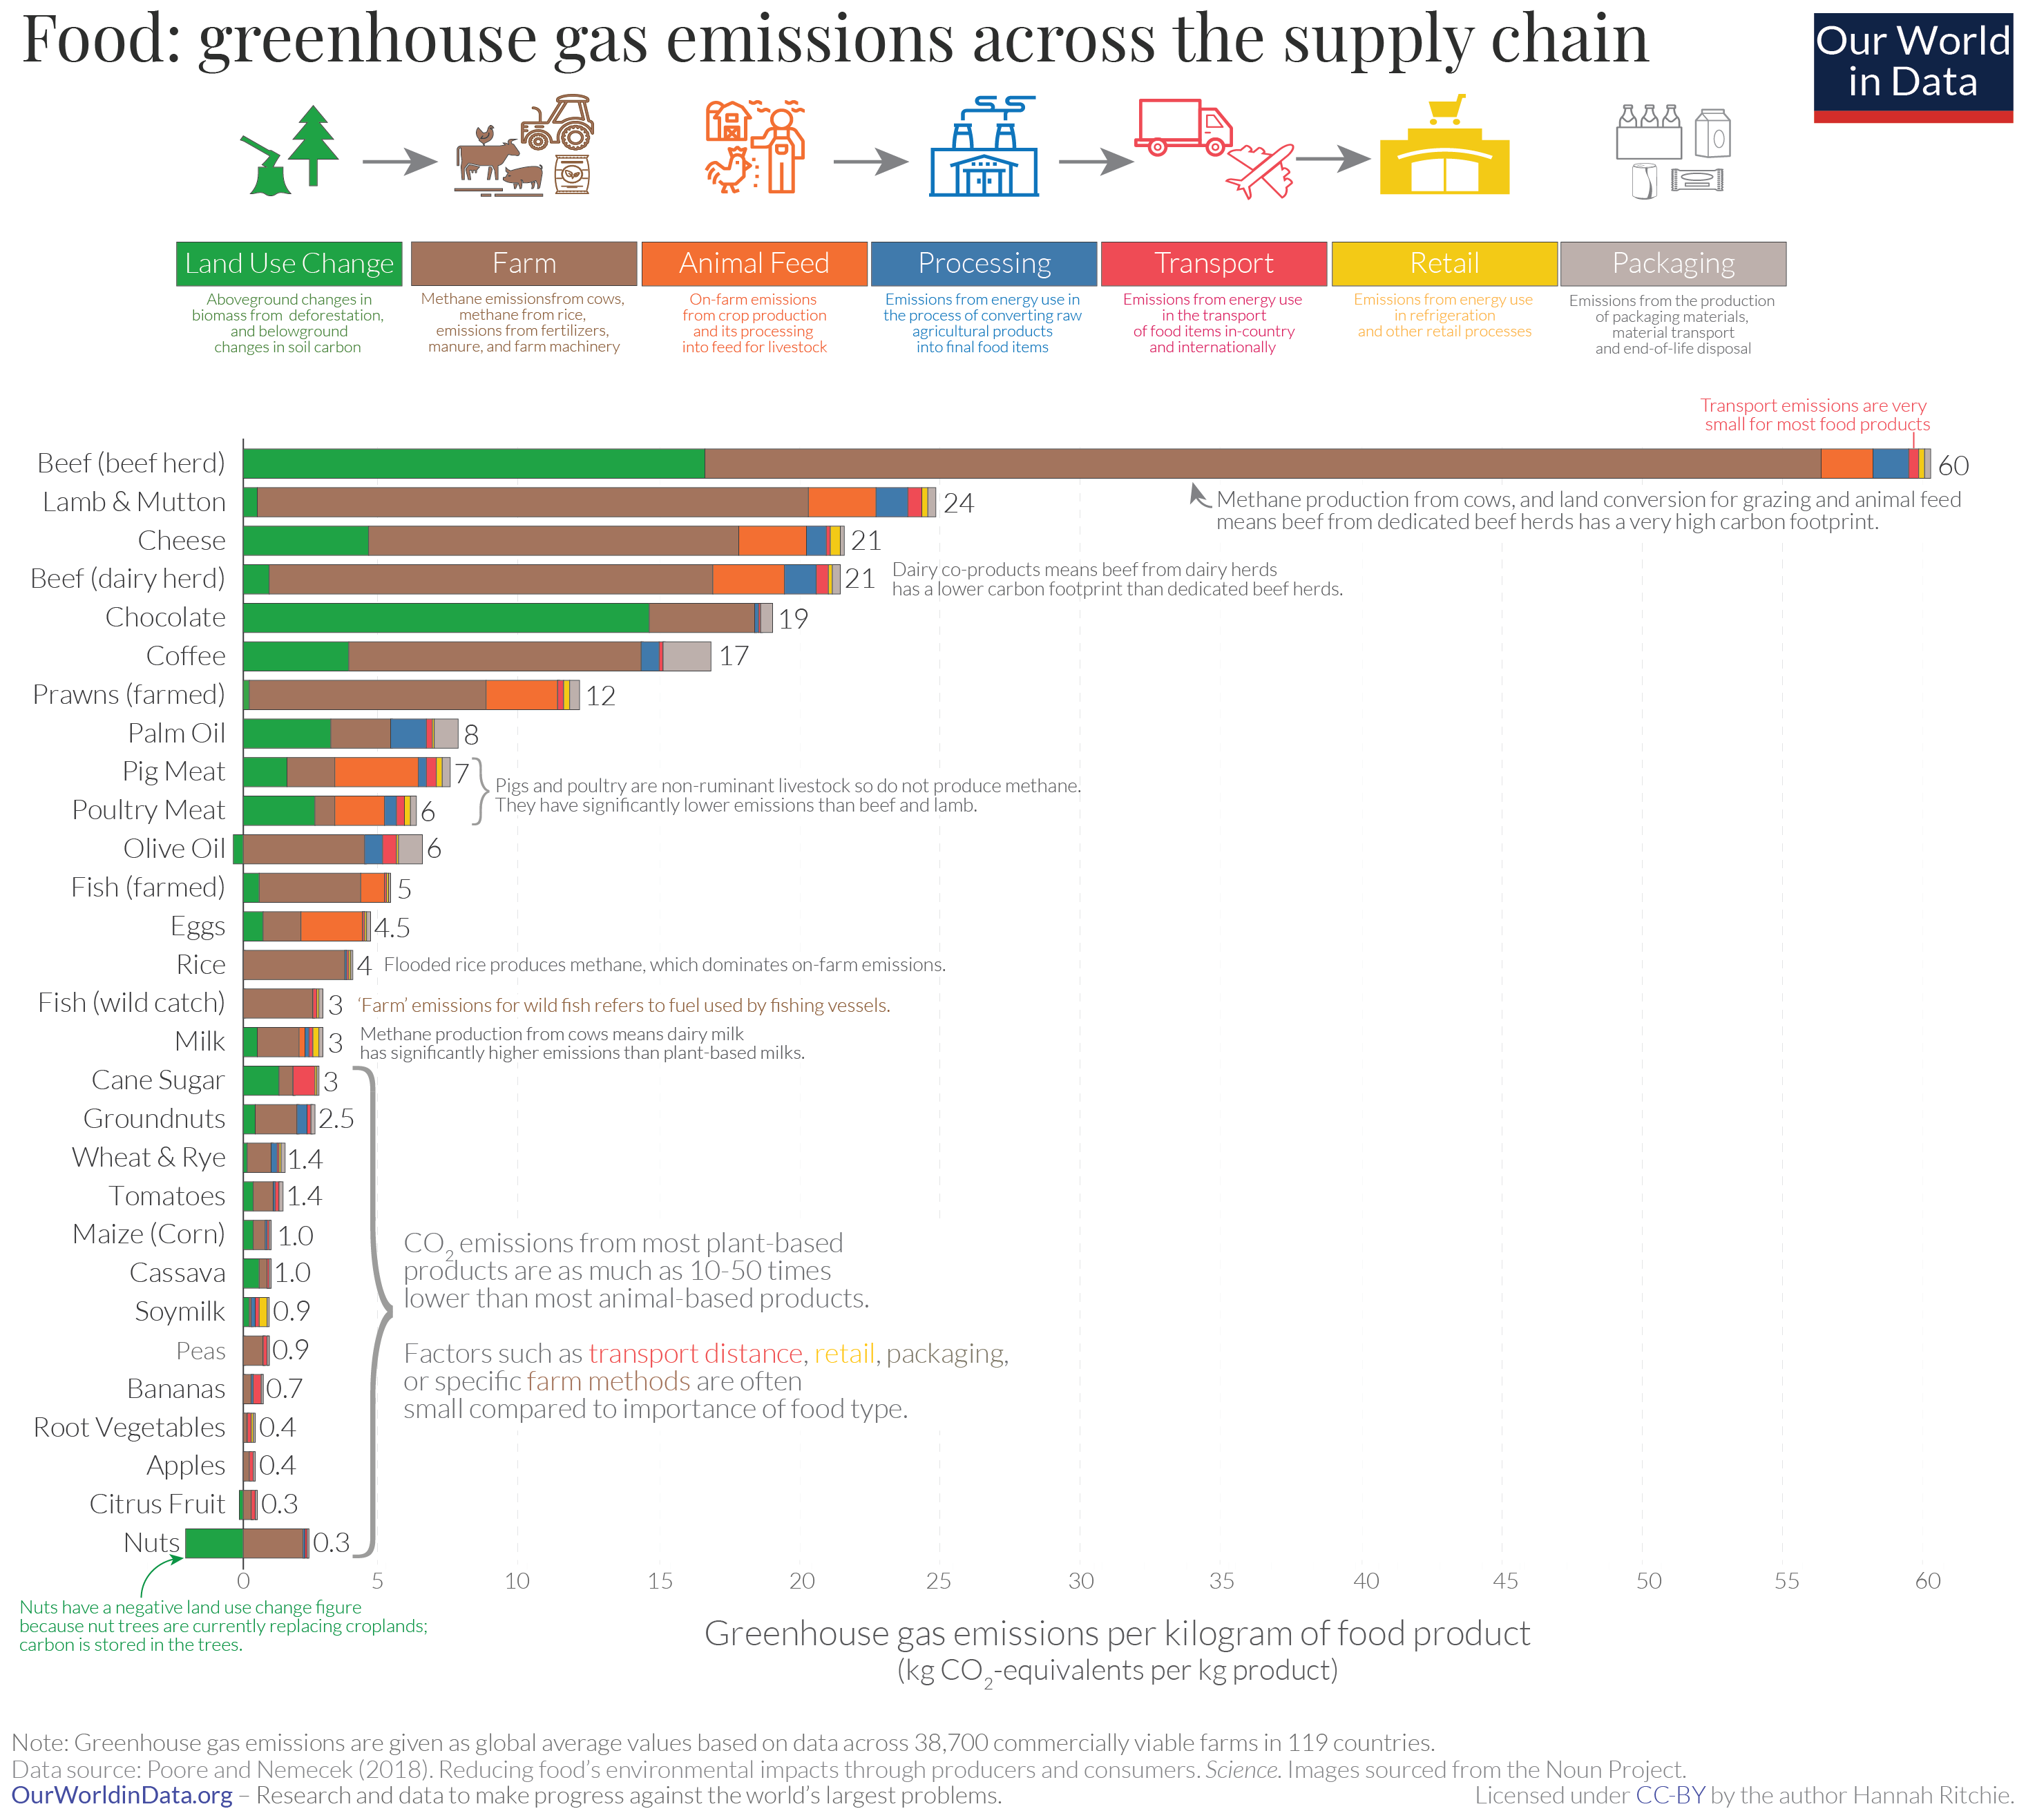 Breakdown of greenhouse gas emissions of various foods